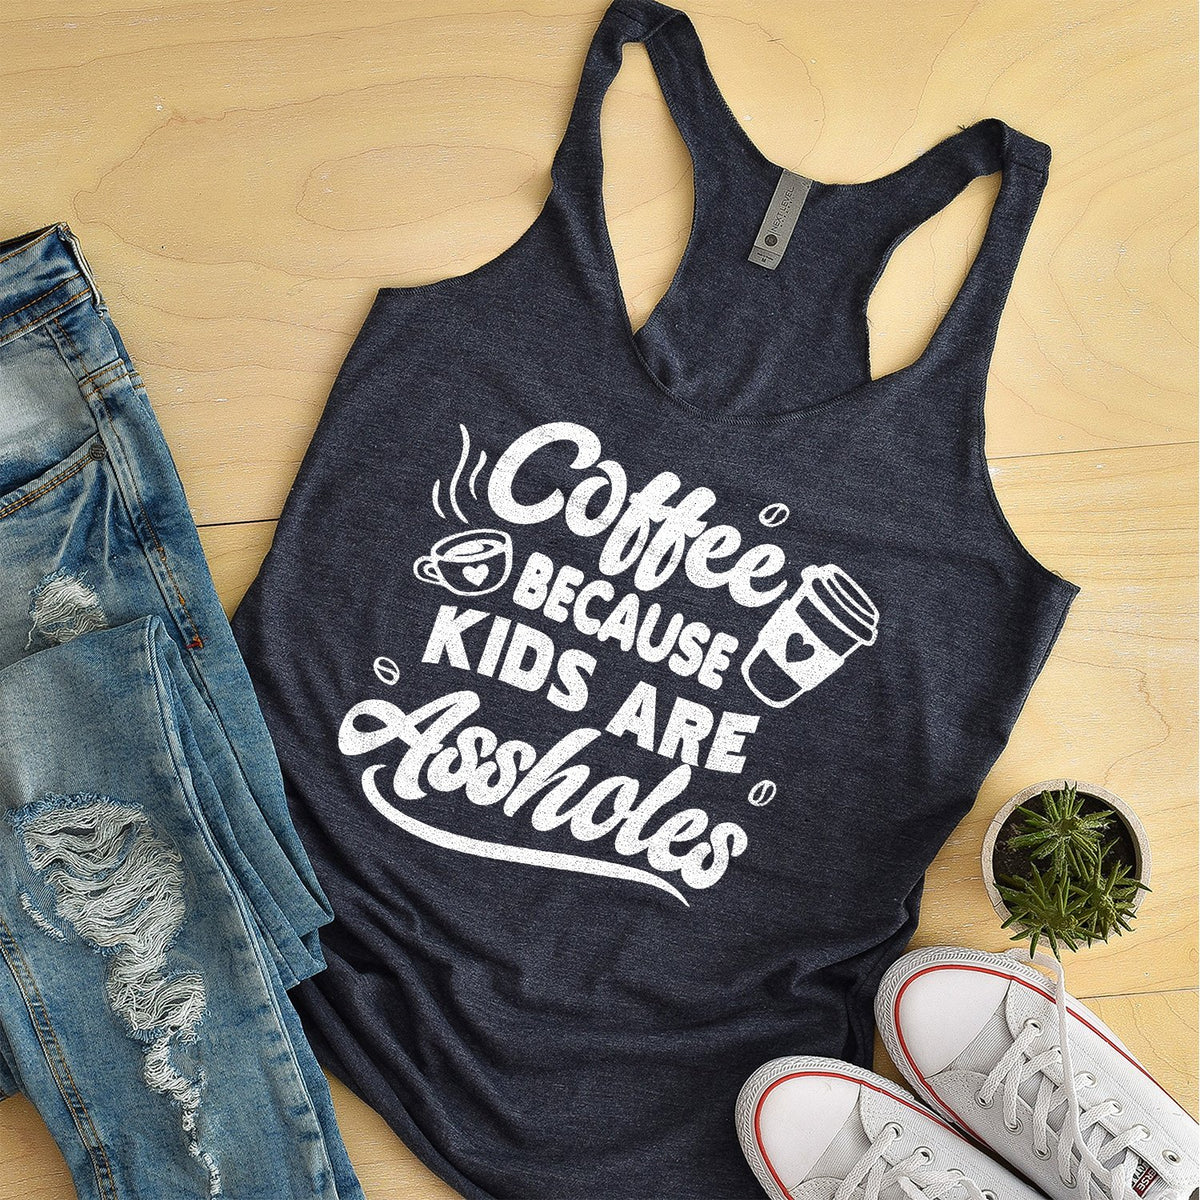 Coffee Because Kids are Assholes - Tank Top Racerback